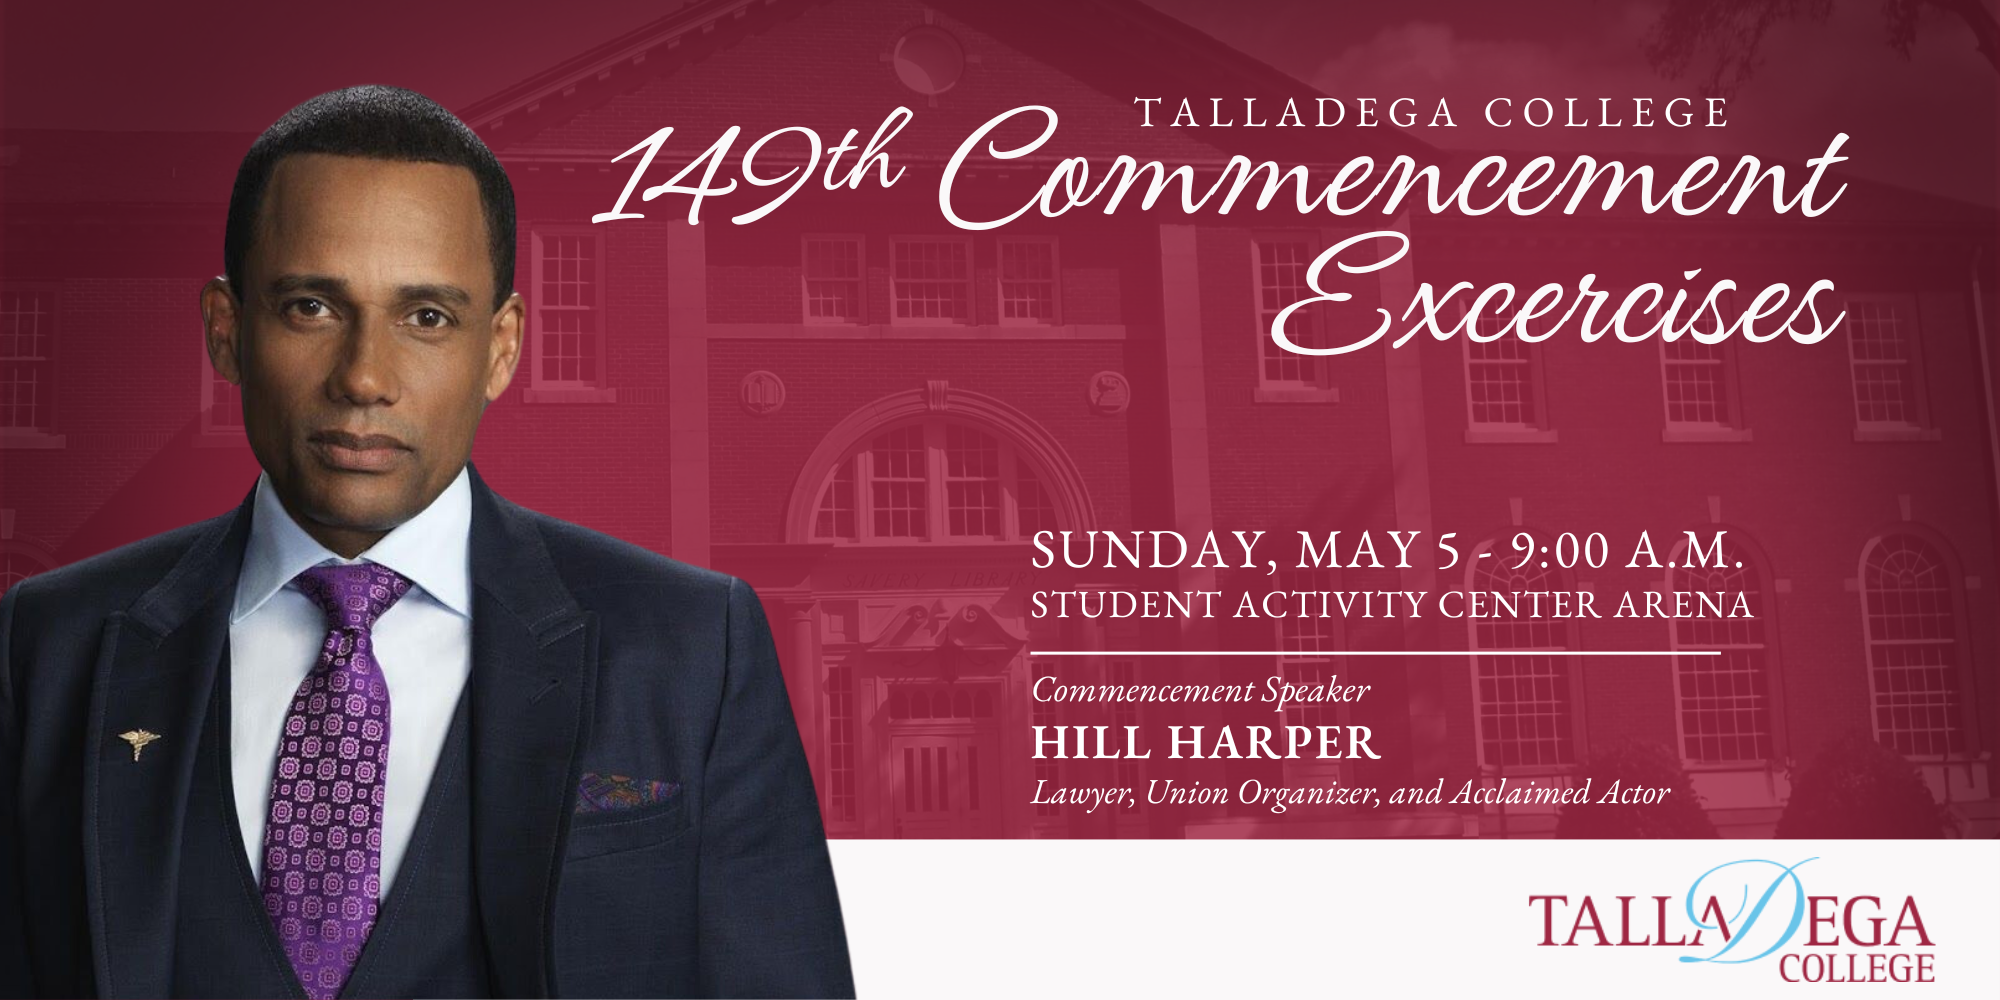 149th Commencement Exercises - Sunday, May 5, 9 a.m., Student Activity Center Arena - Speaker: Hill Harper